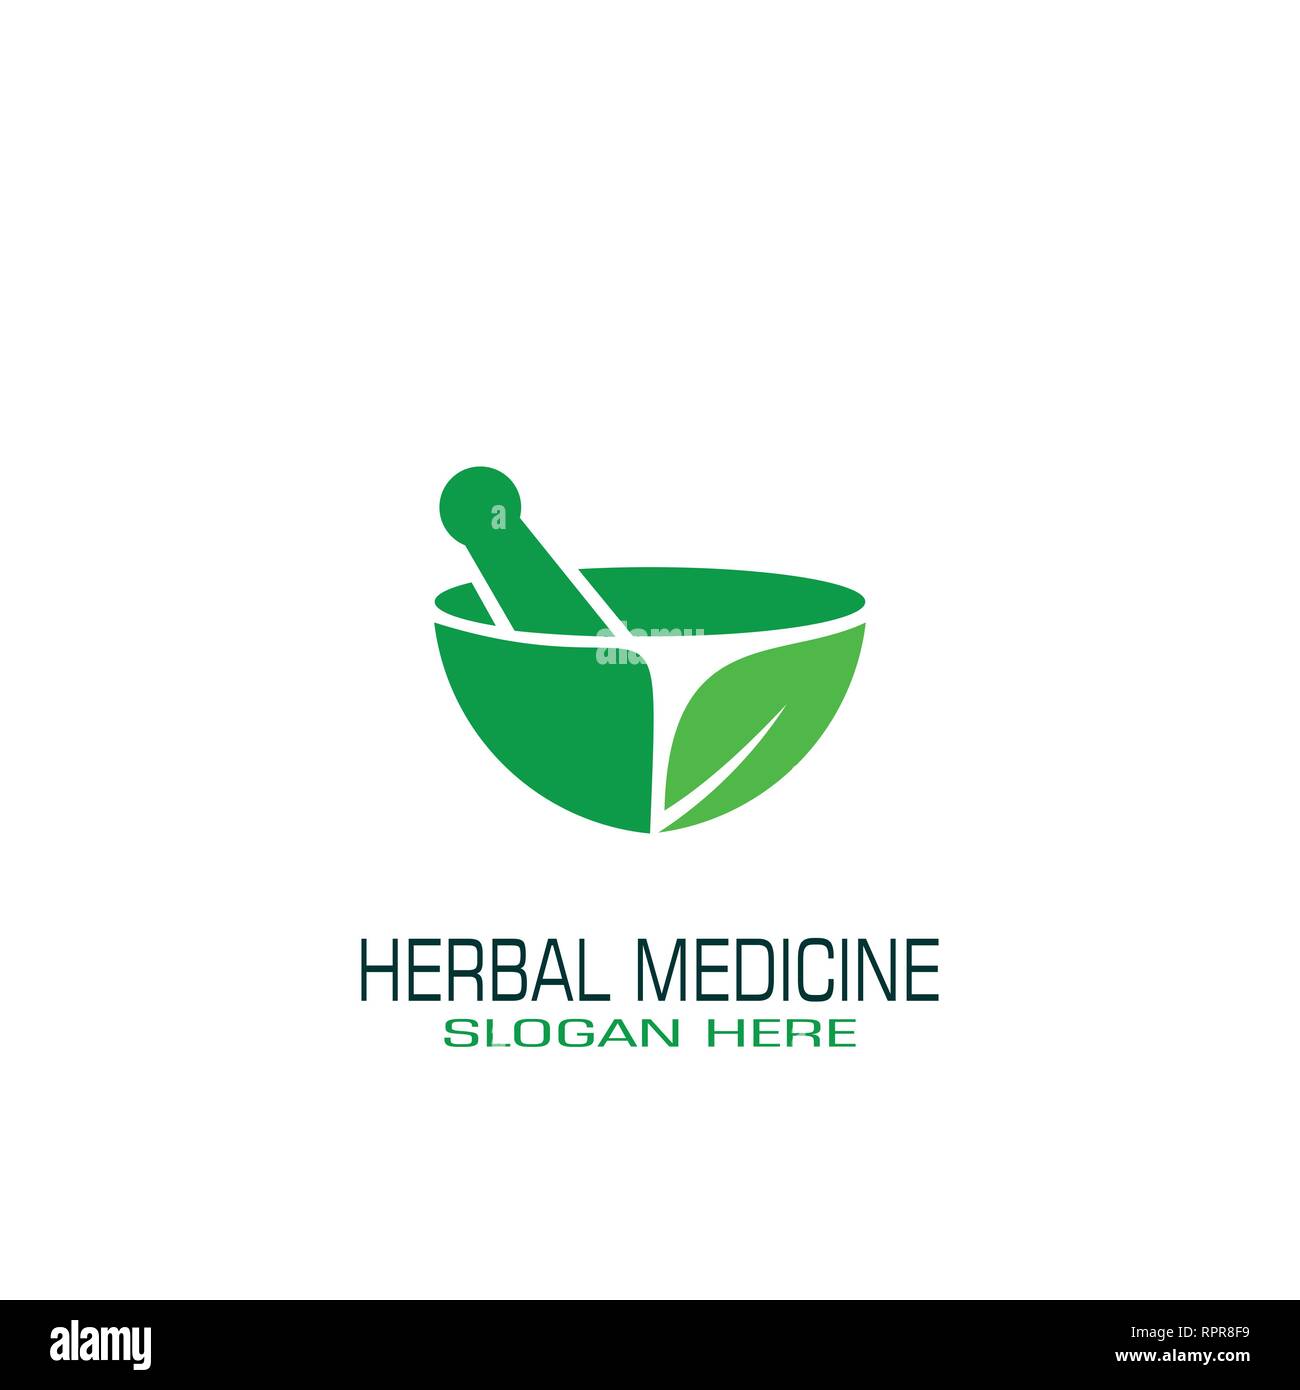 Herbal Medicine Graphic Logo Template Isolated On White